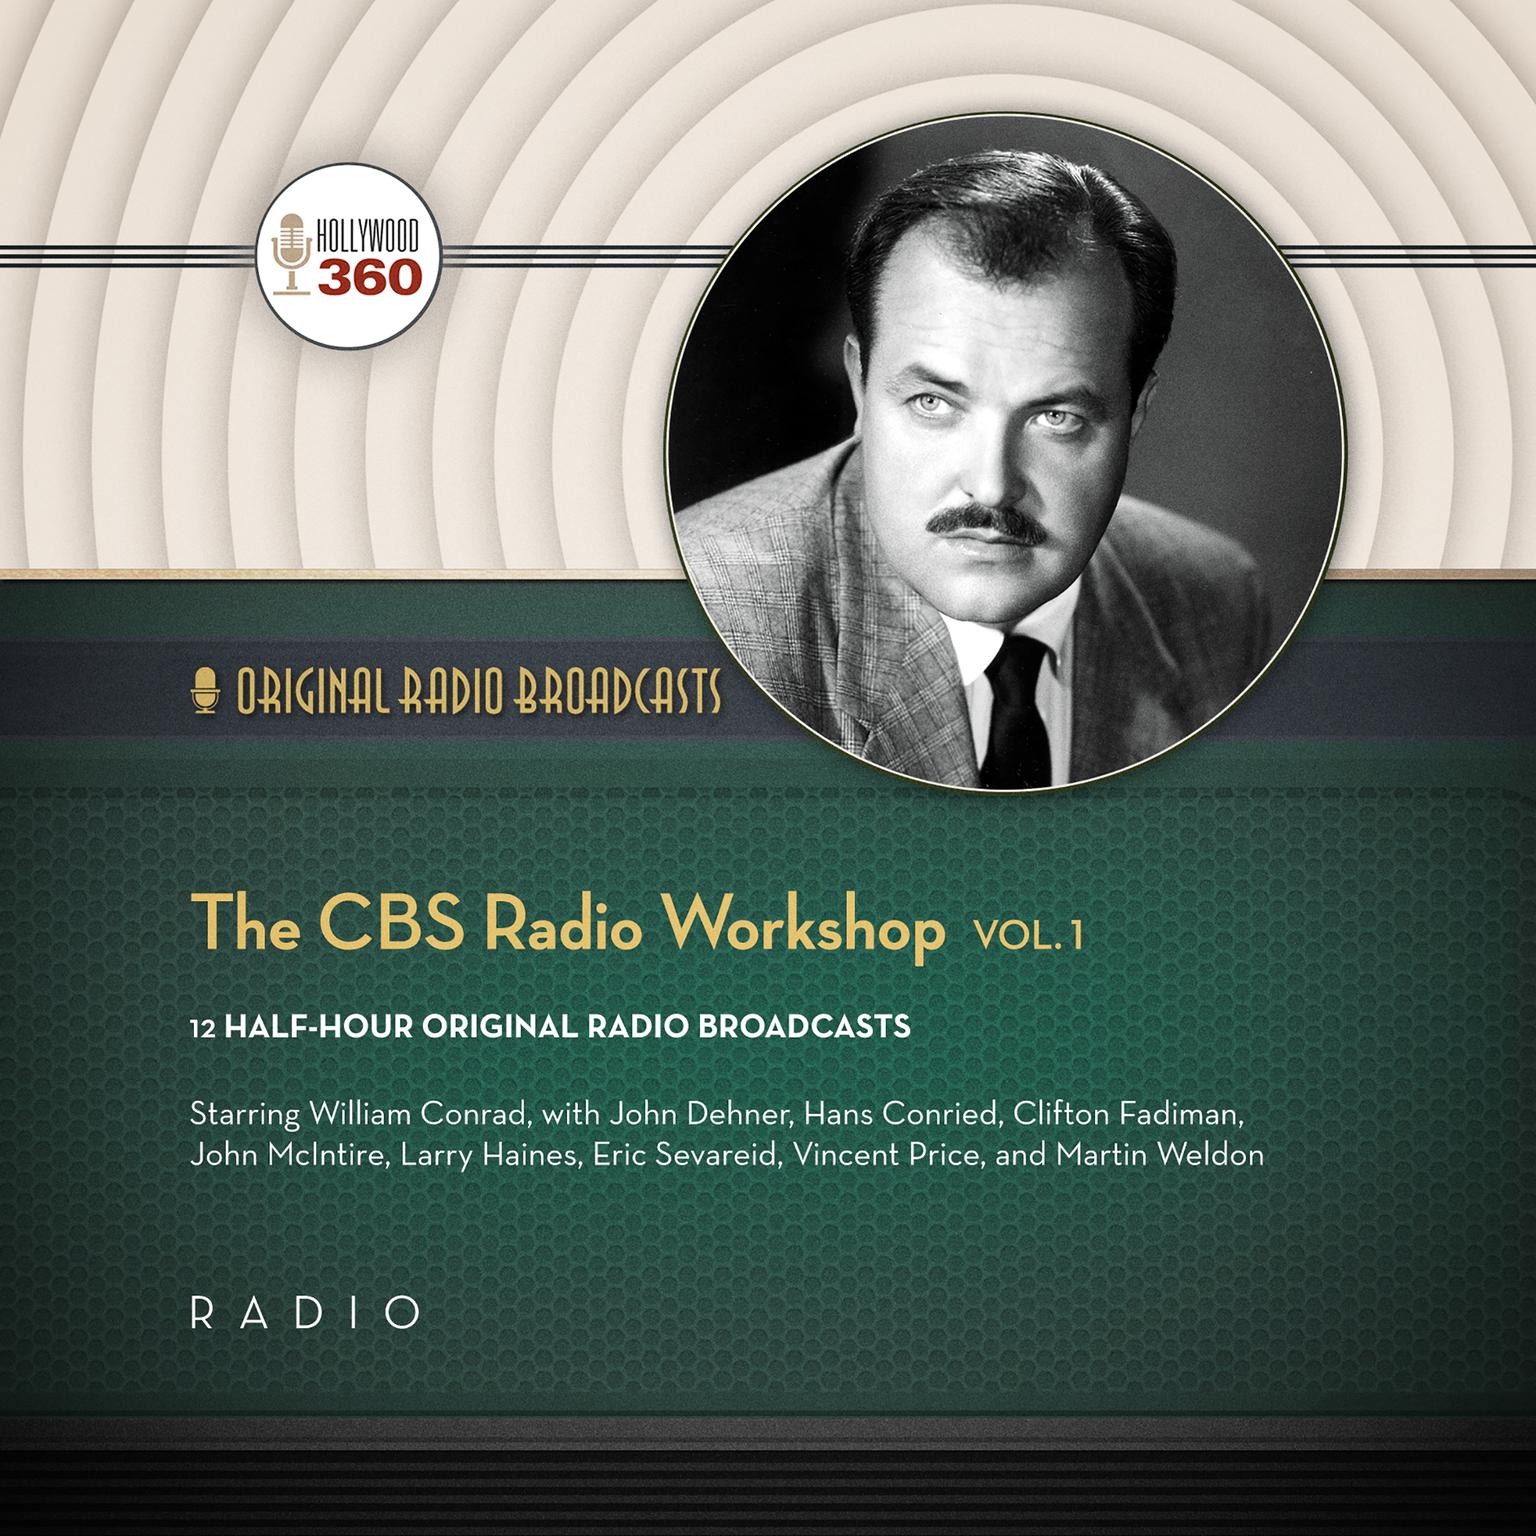 The CBS Radio Workshop, Vol. 1 Audiobook, by various authors